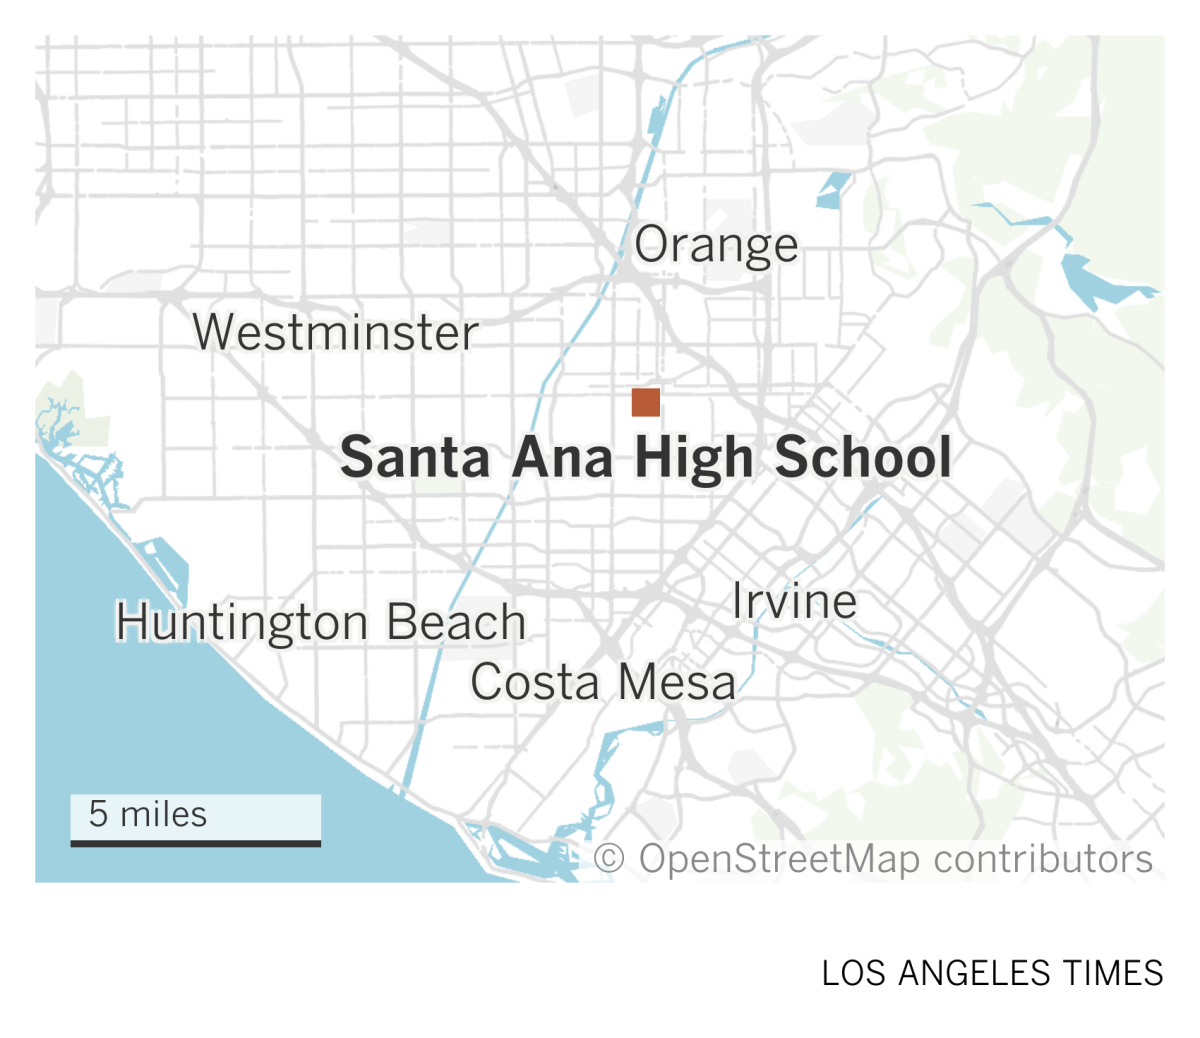 A map of Orange County showing the location of Santa Ana High School